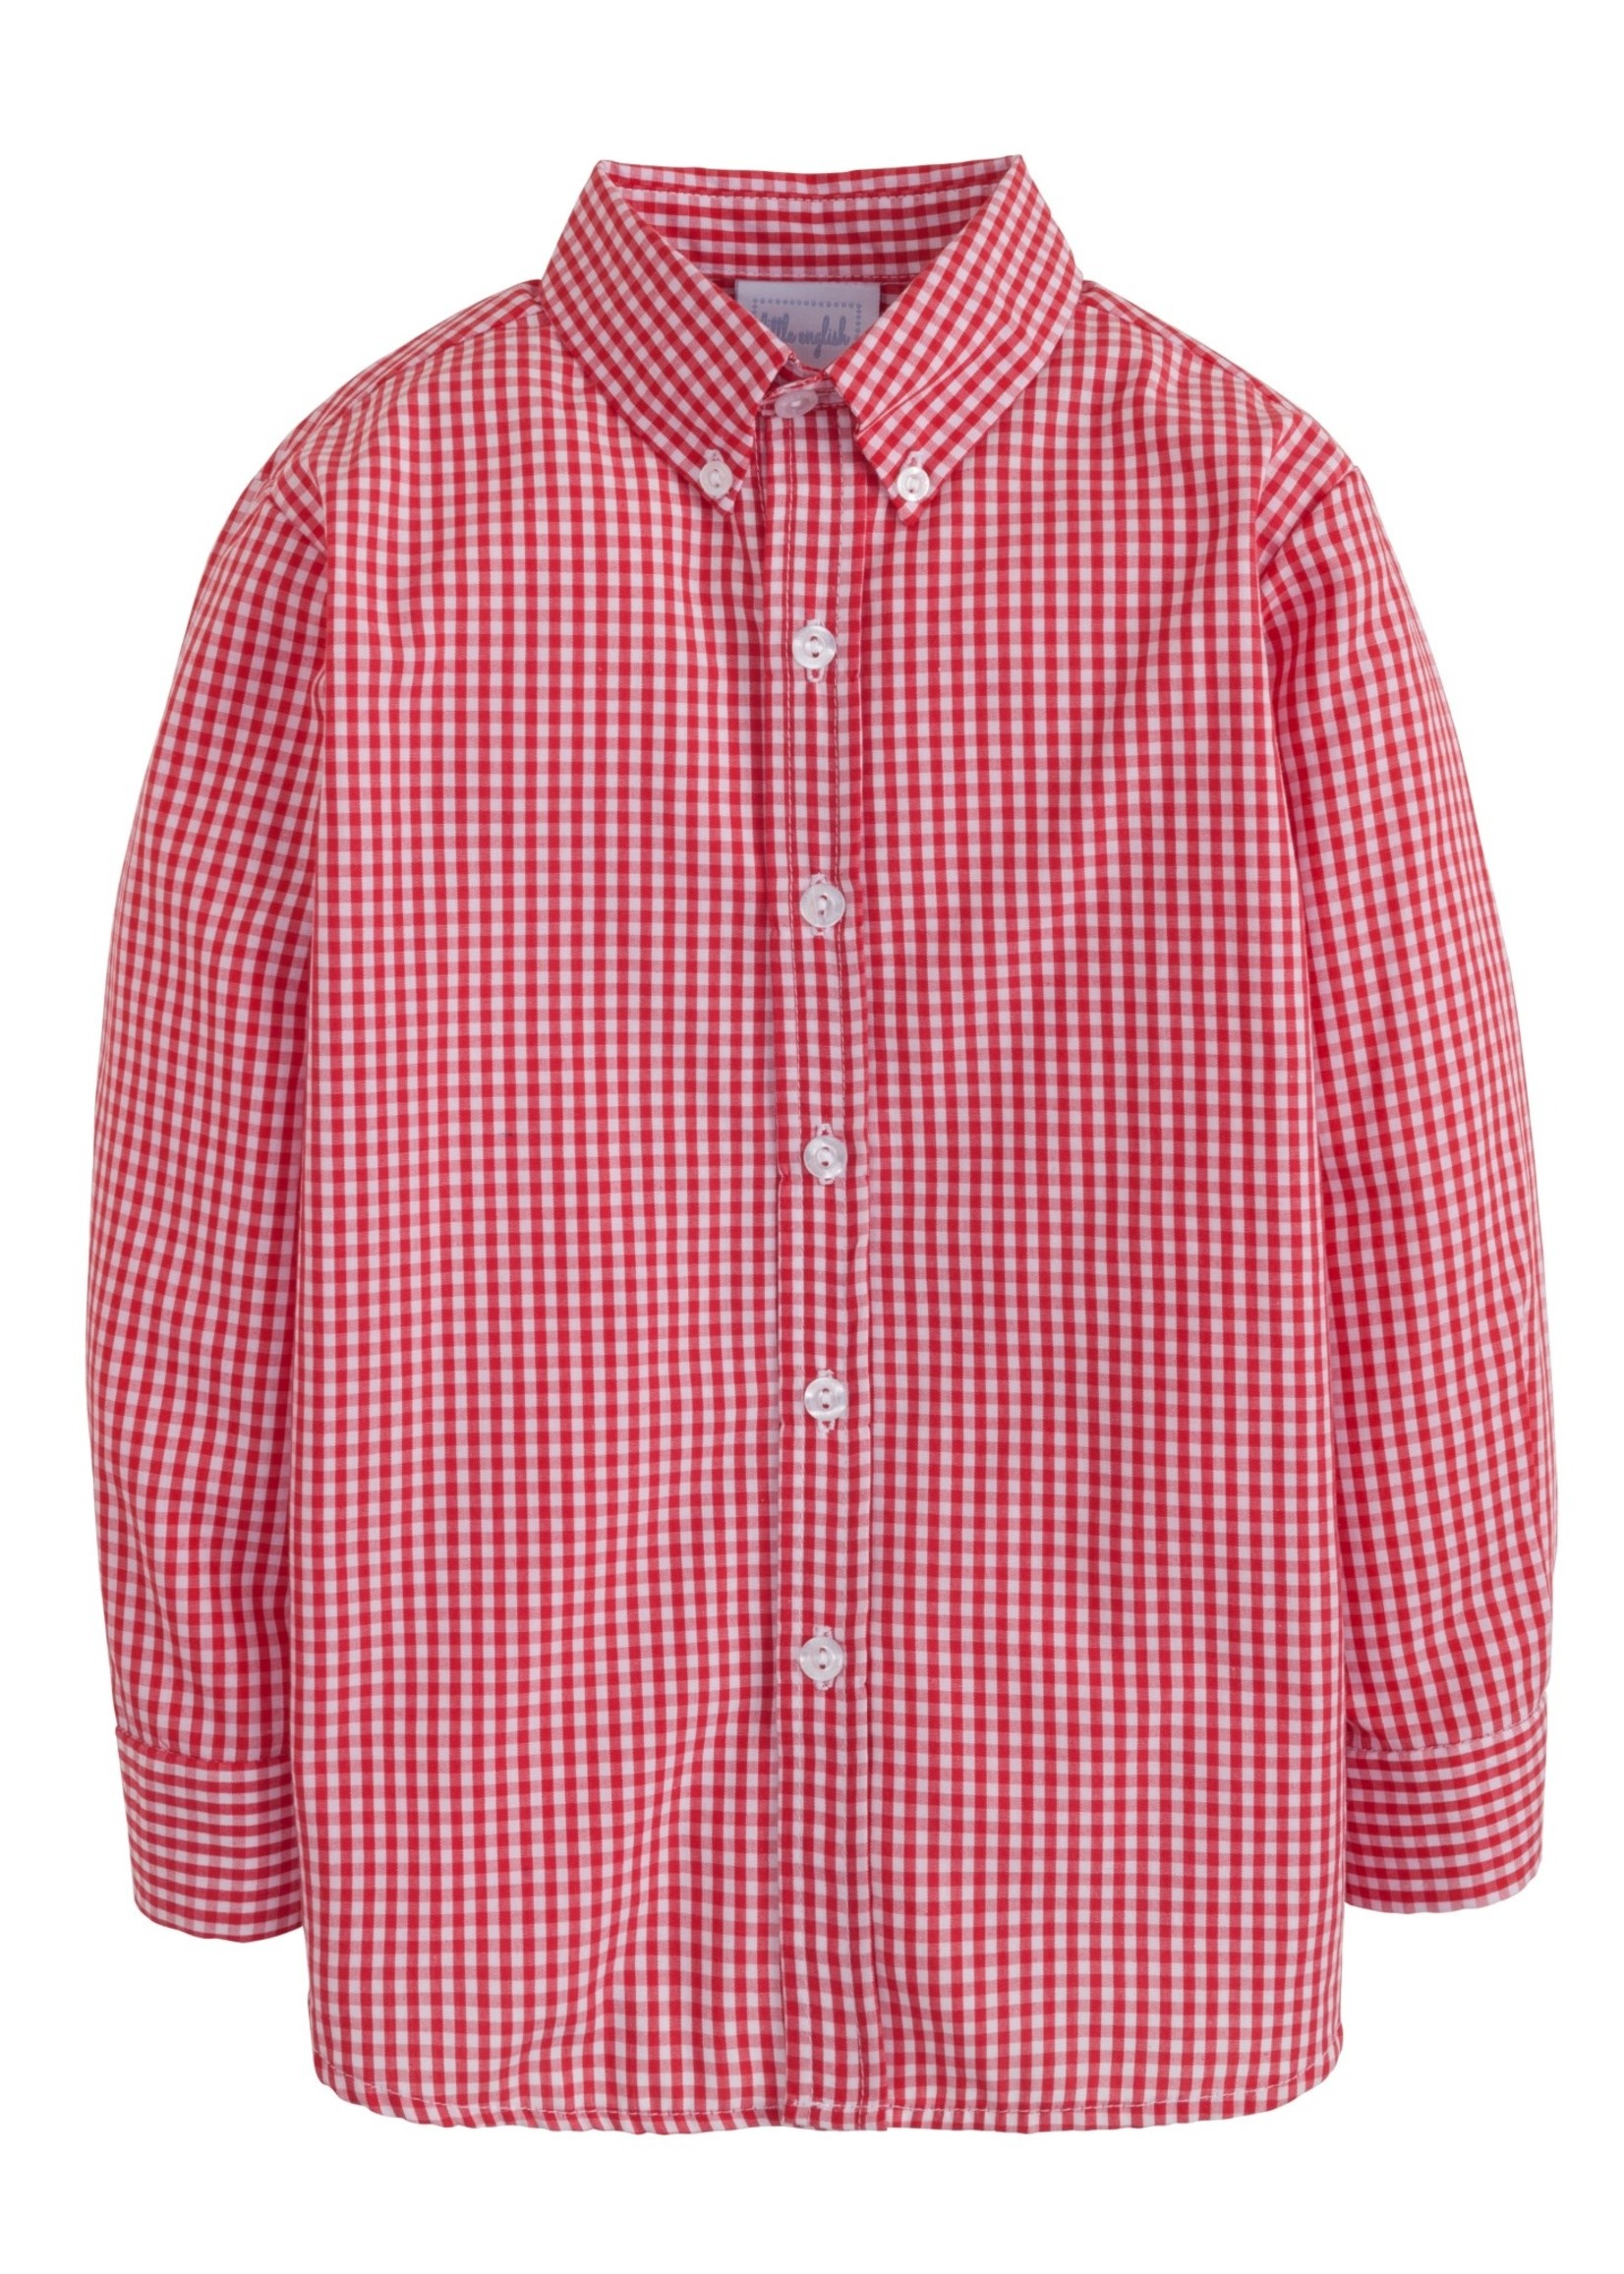 Little English Red Gingham Button Down Shirt